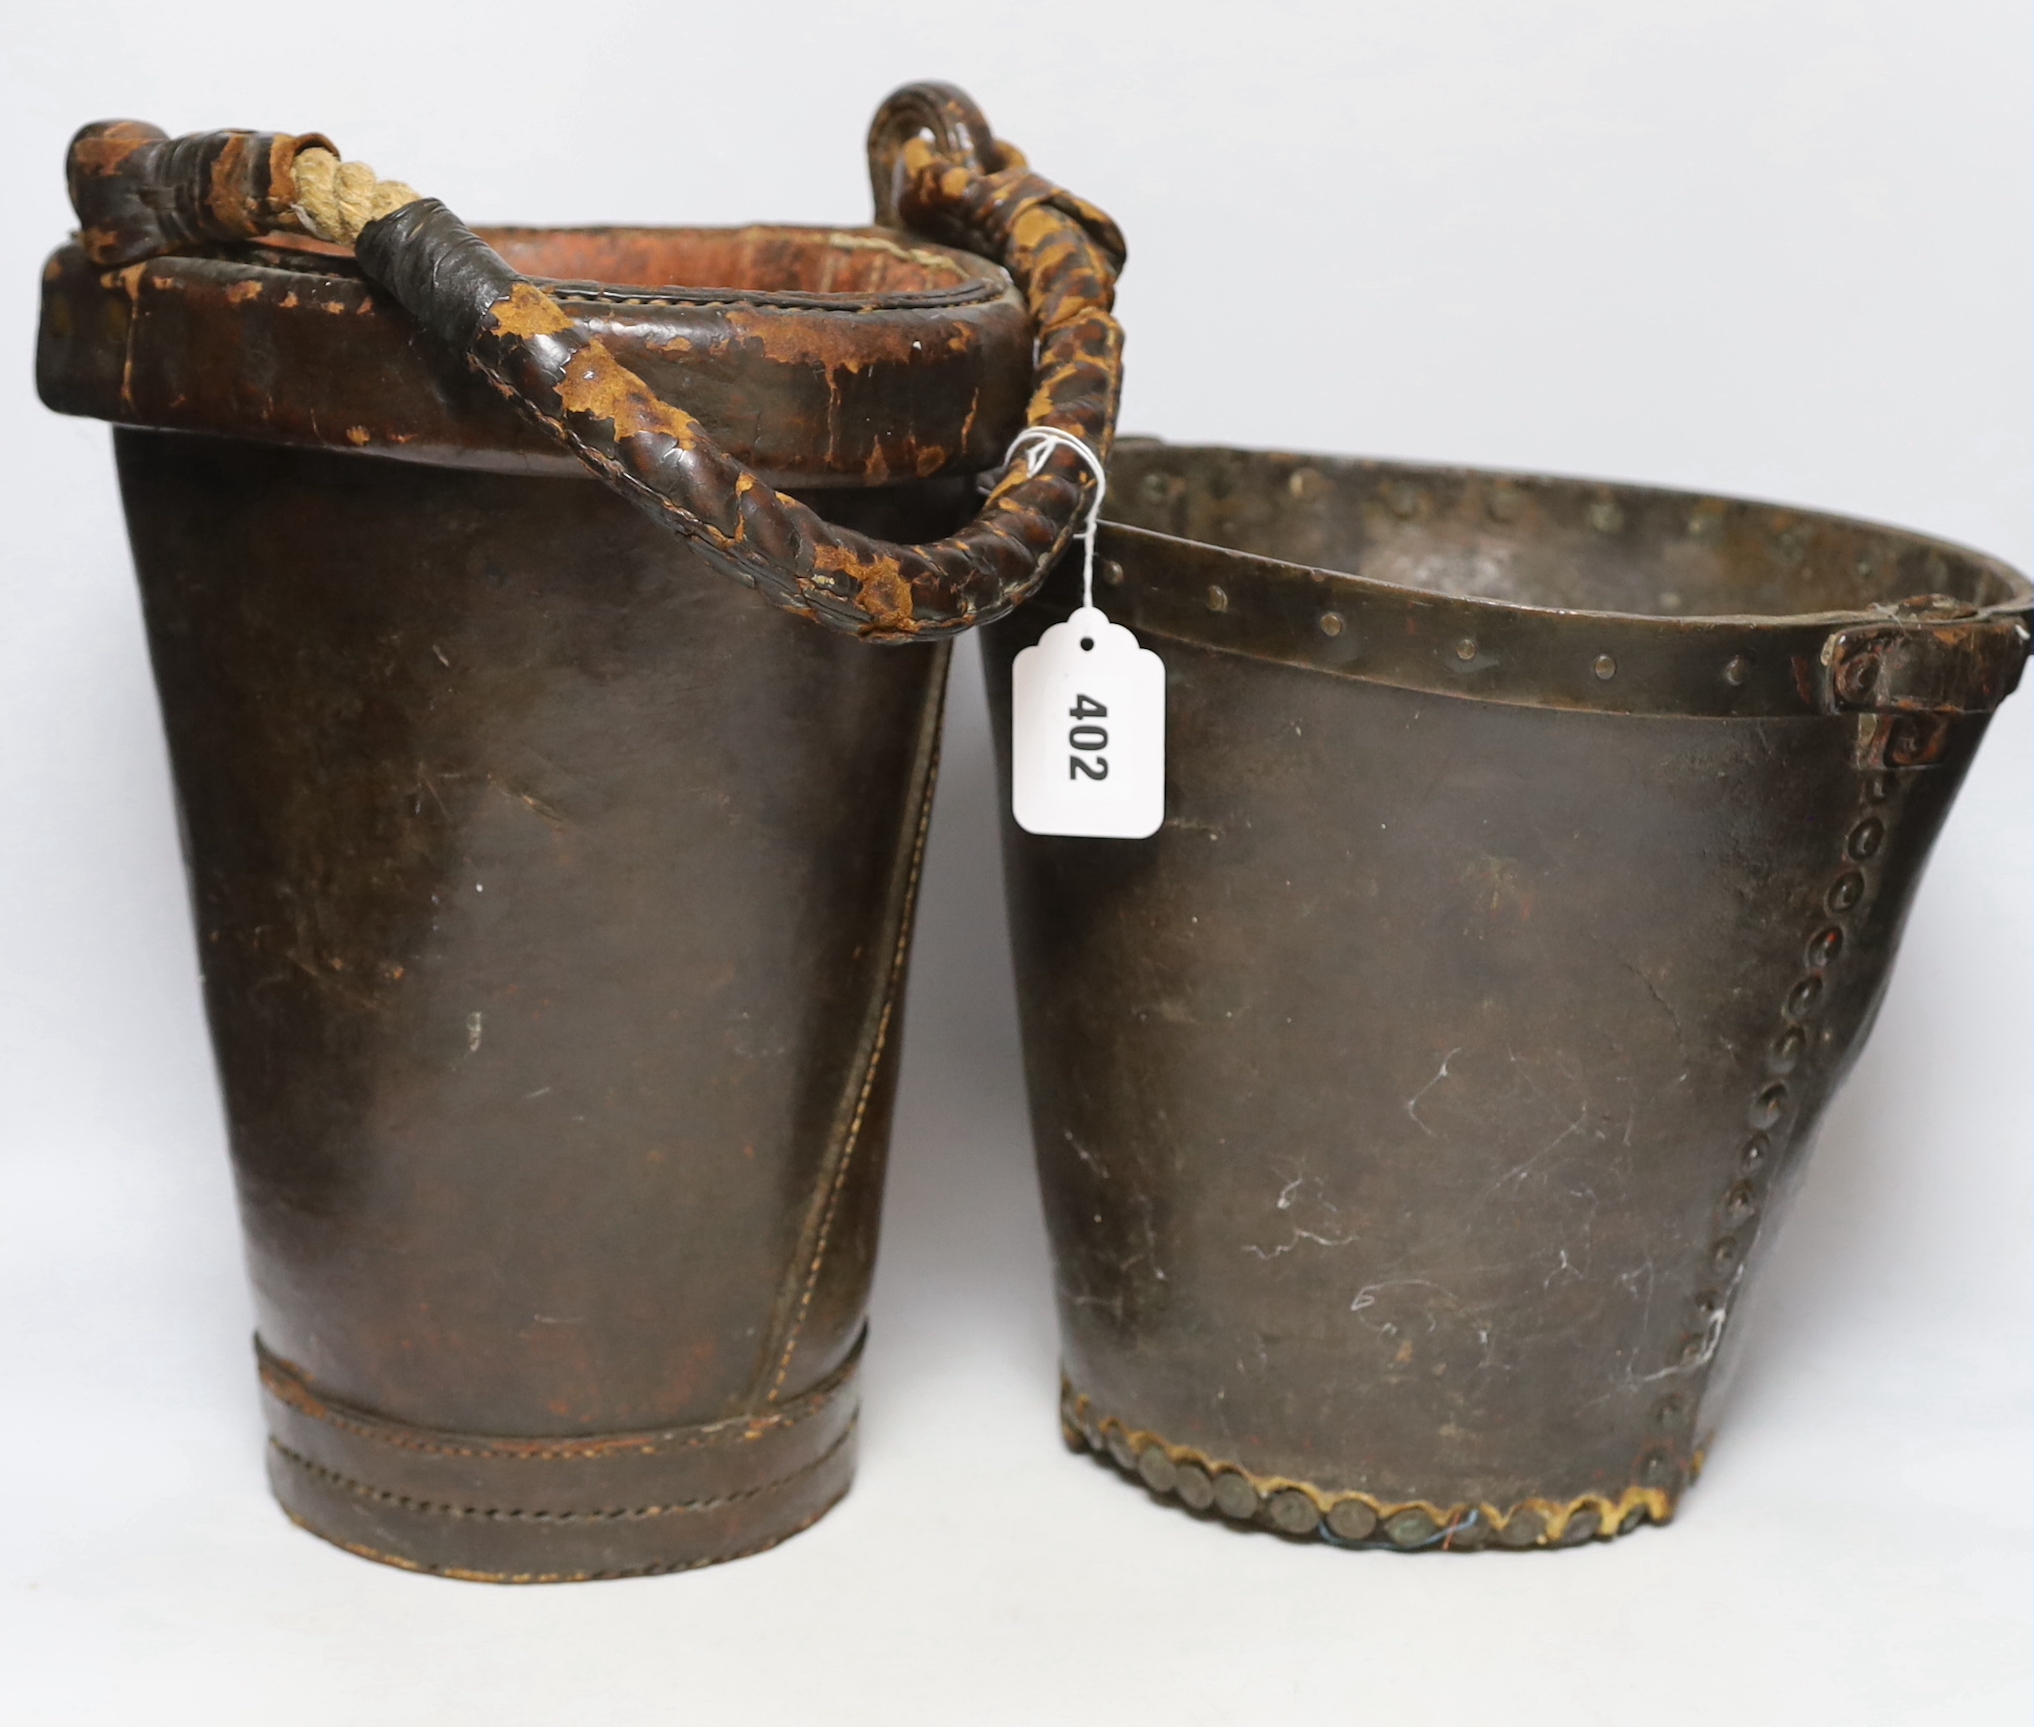 Two 19th century leather fire buckets, tallest 32.5cm